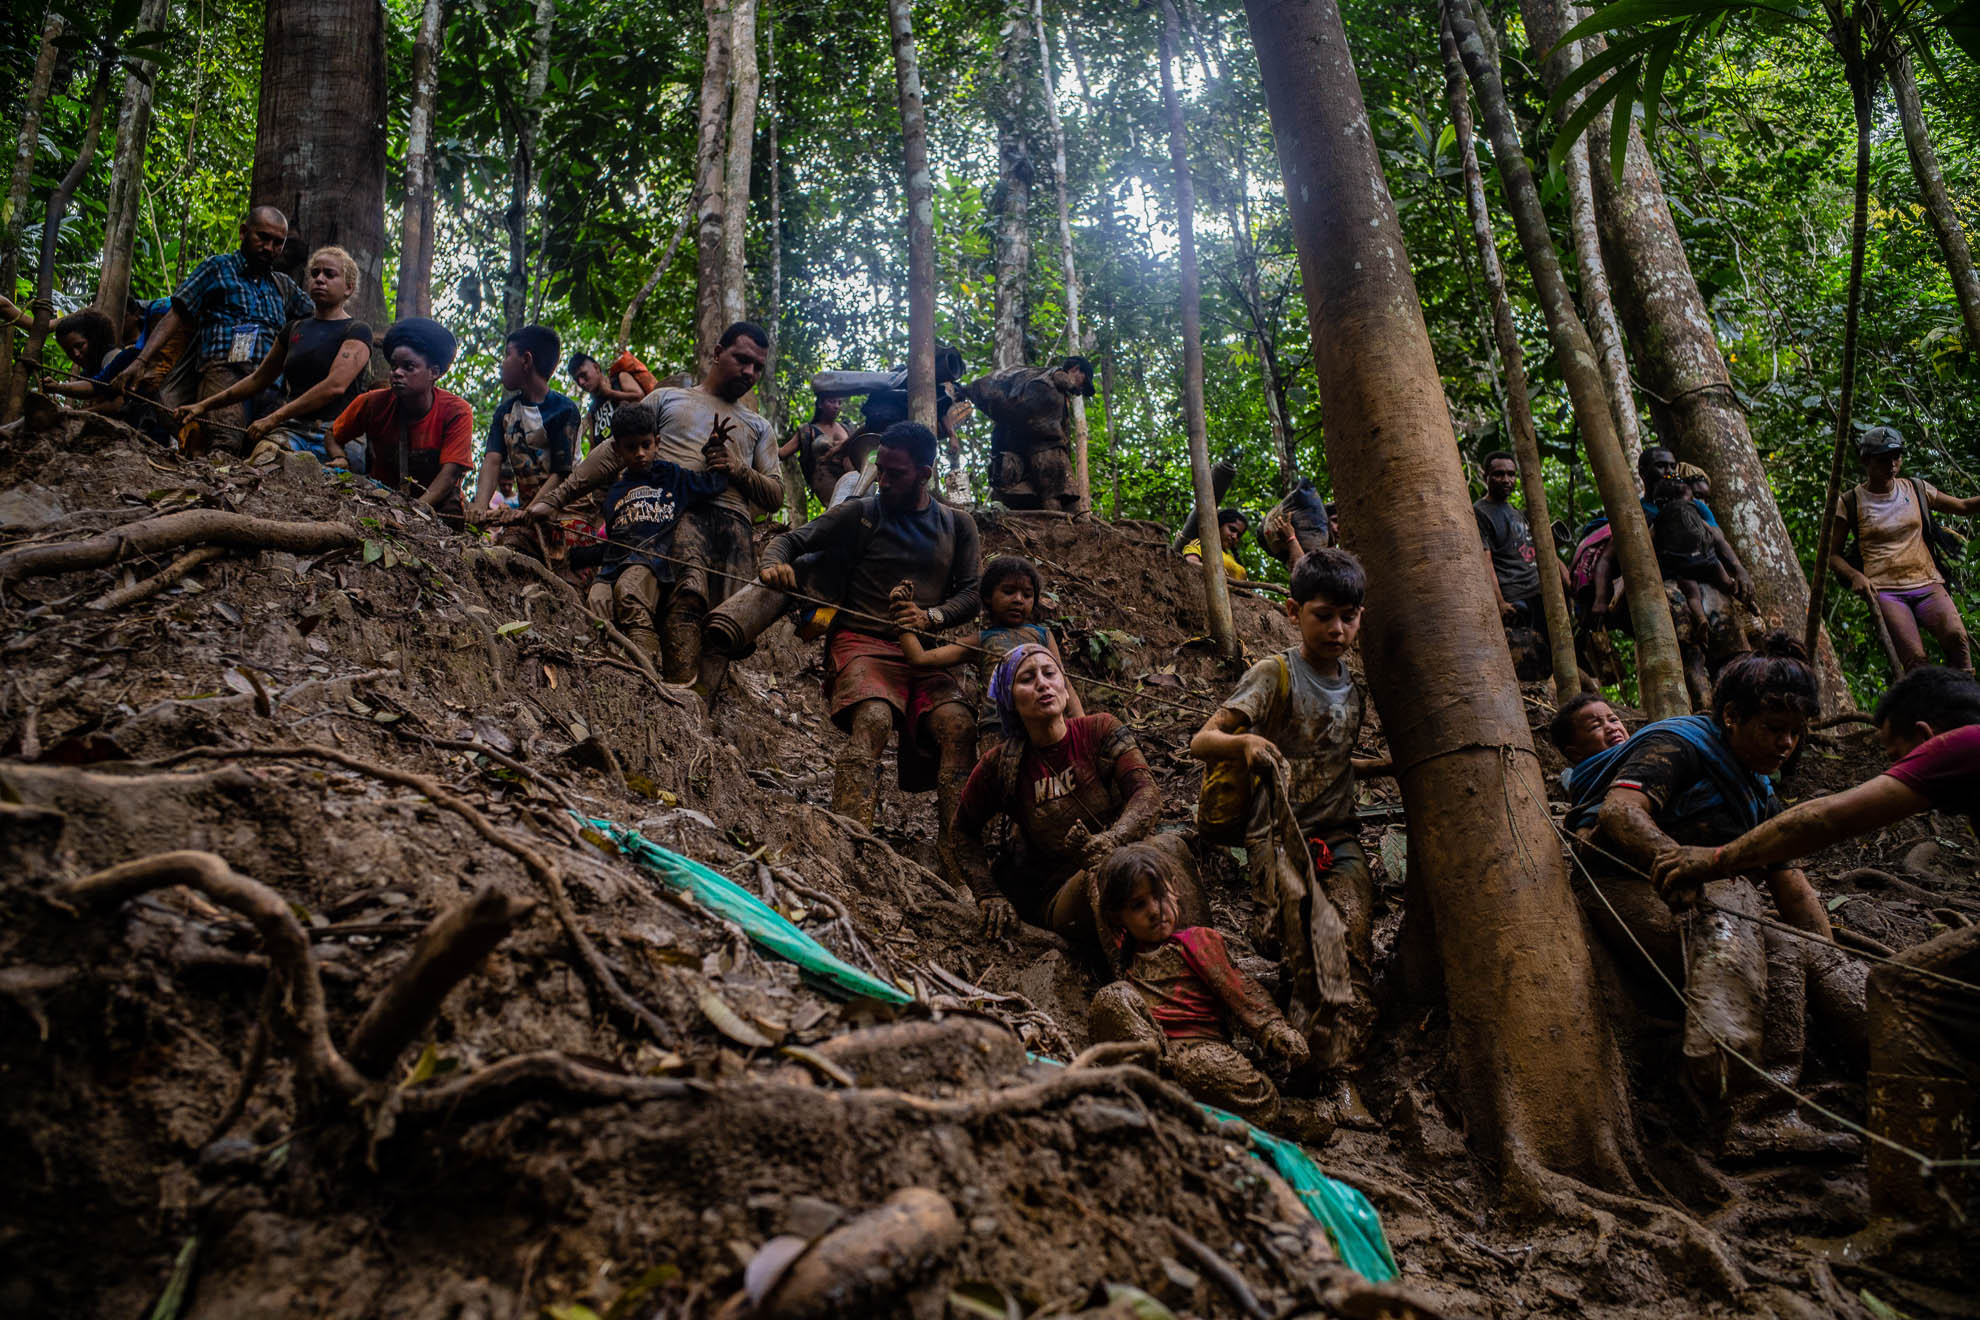 This year, an unprecedented 200,000 people have crossed the rugged jungle between South and Central America known as the Darien Gap, almost twenty times the average of a few years ago. The vast majority are Venezuelans. September 2022.